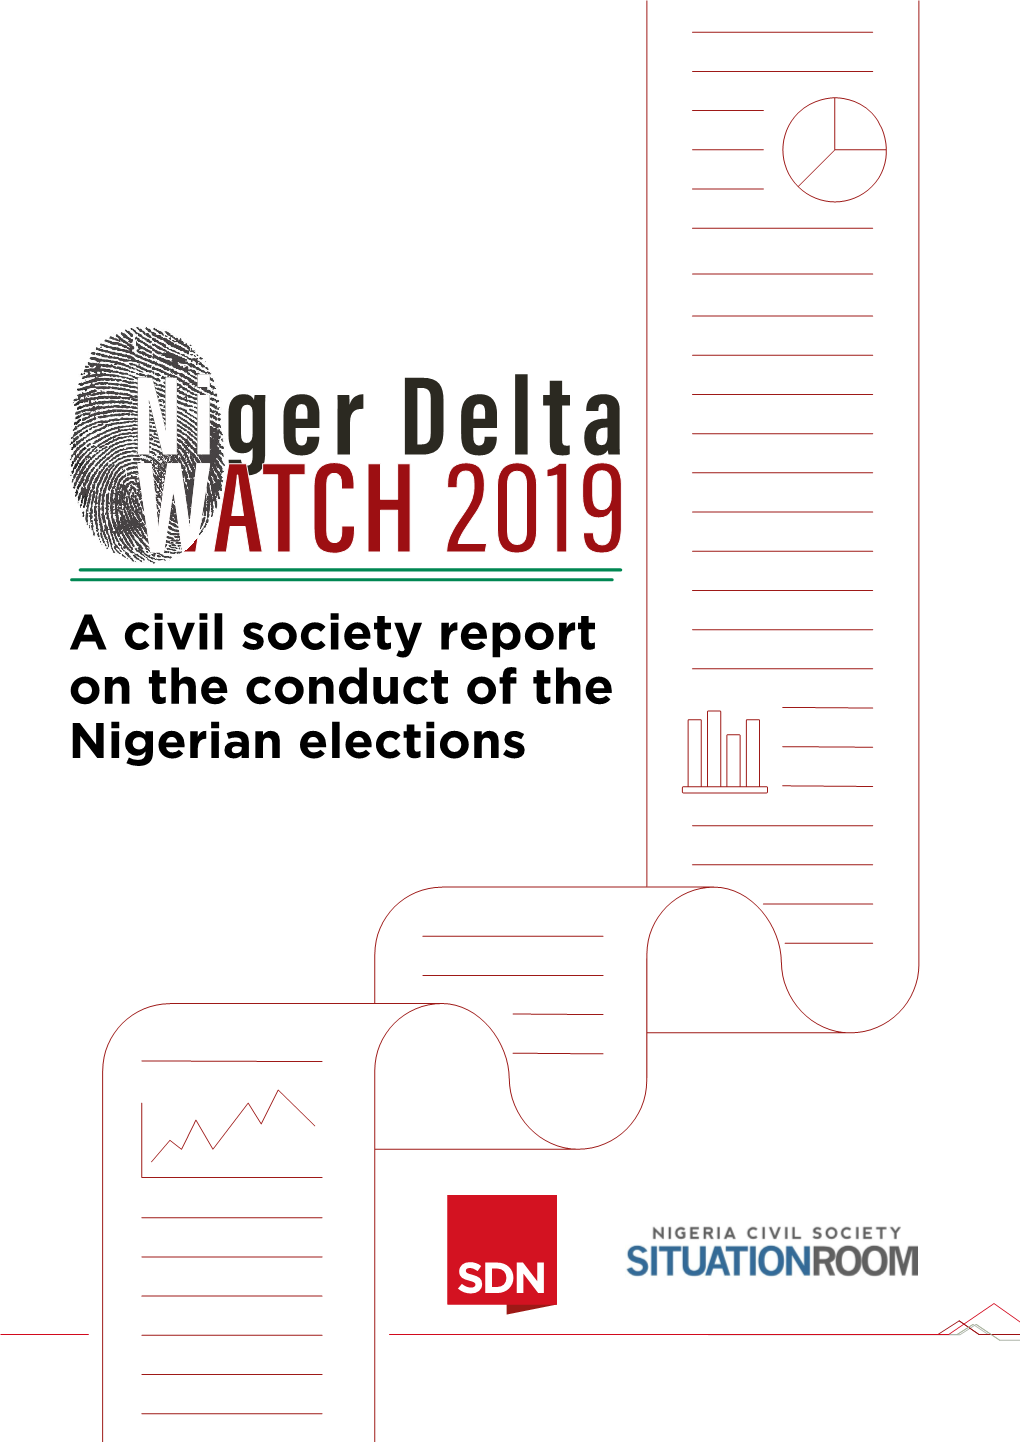 A Civil Society Report on the Conduct of the Nigerian Elections July 2019